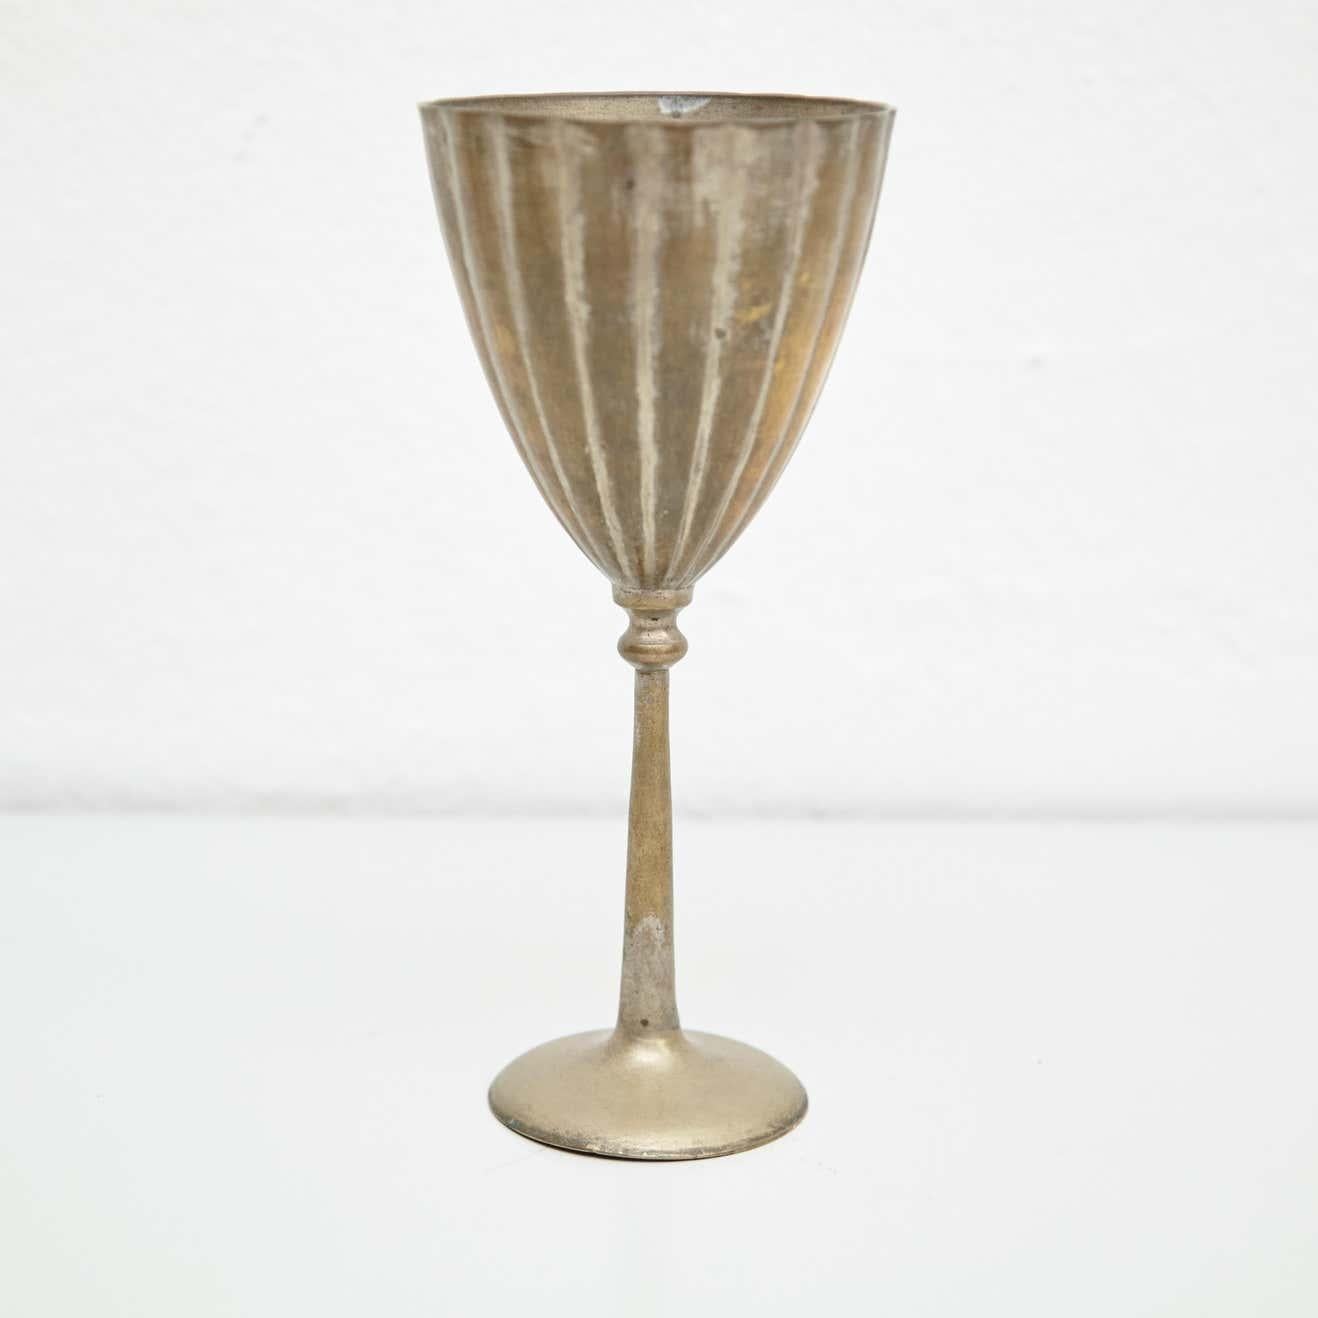 Early 19th century religious bronze chalice
by unknown manufacturer, France.

In original condition, with minor wear consistent with age and use, preserving a beautiful patina.

Materials:
Bronze

Dimensions:
Ø 9.5 cm x H 20.5 cm.